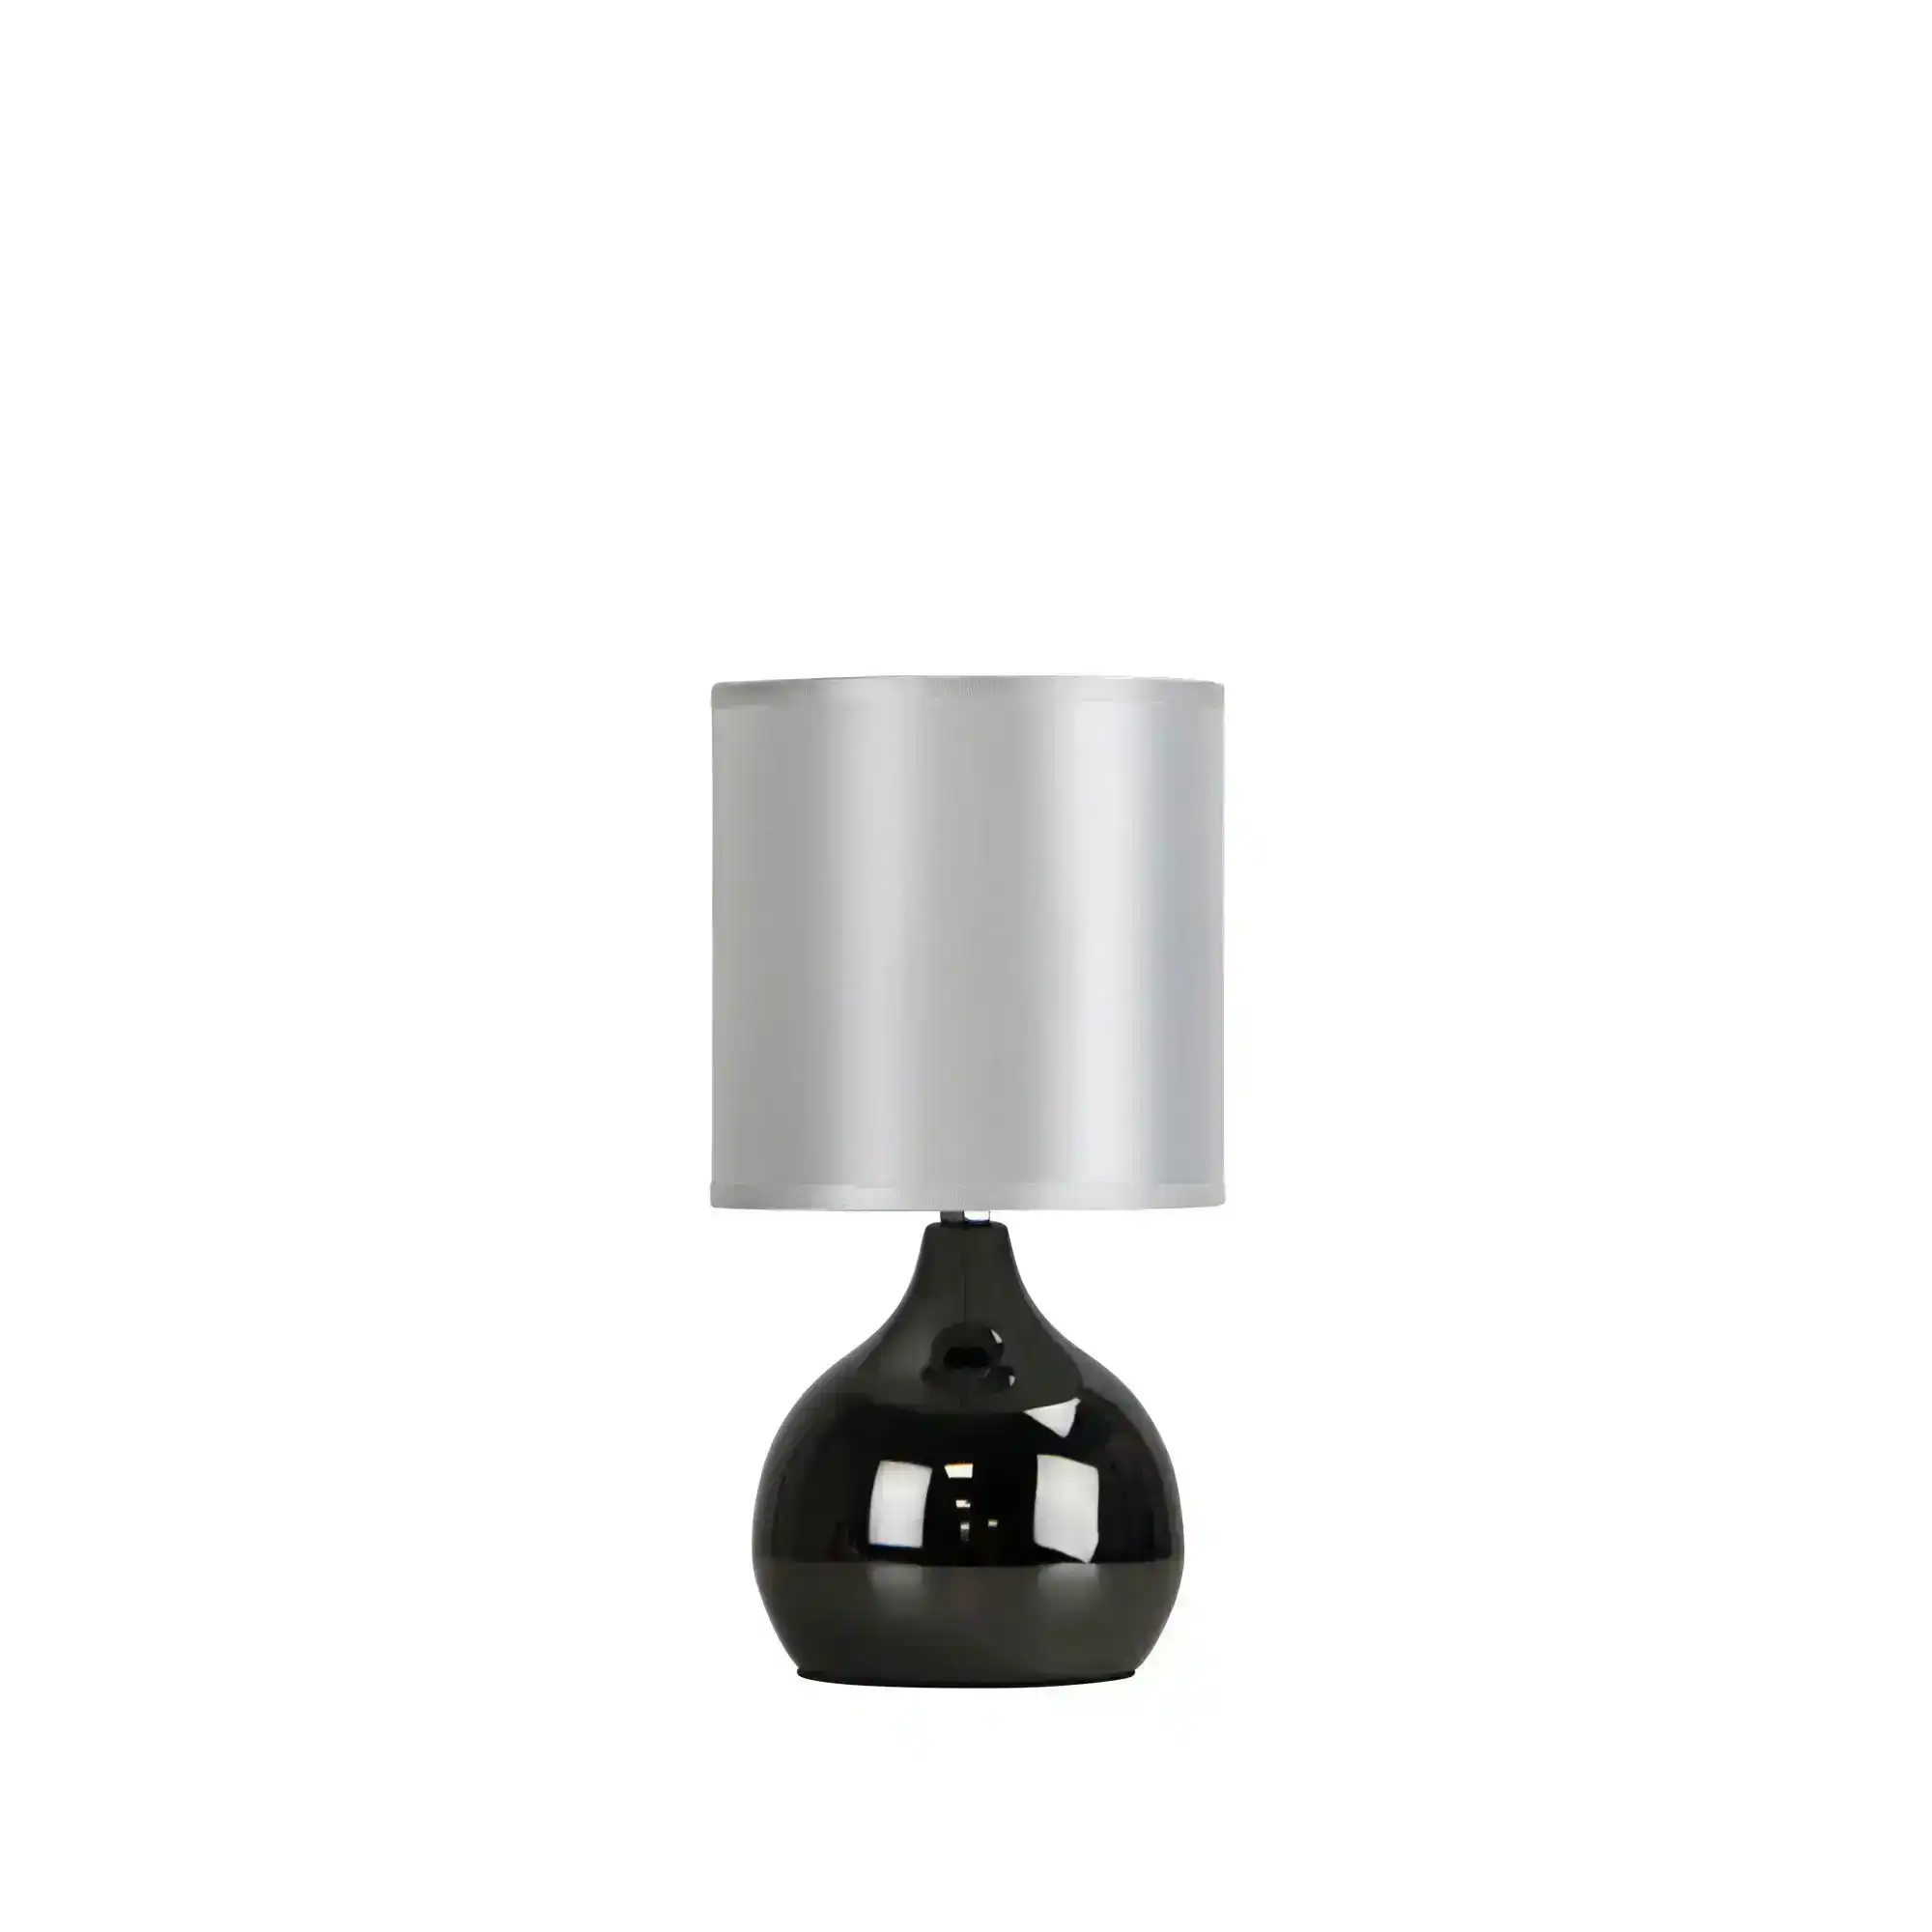 LOTTI ON / OFF Touch Lamp in Gunmetal Finish